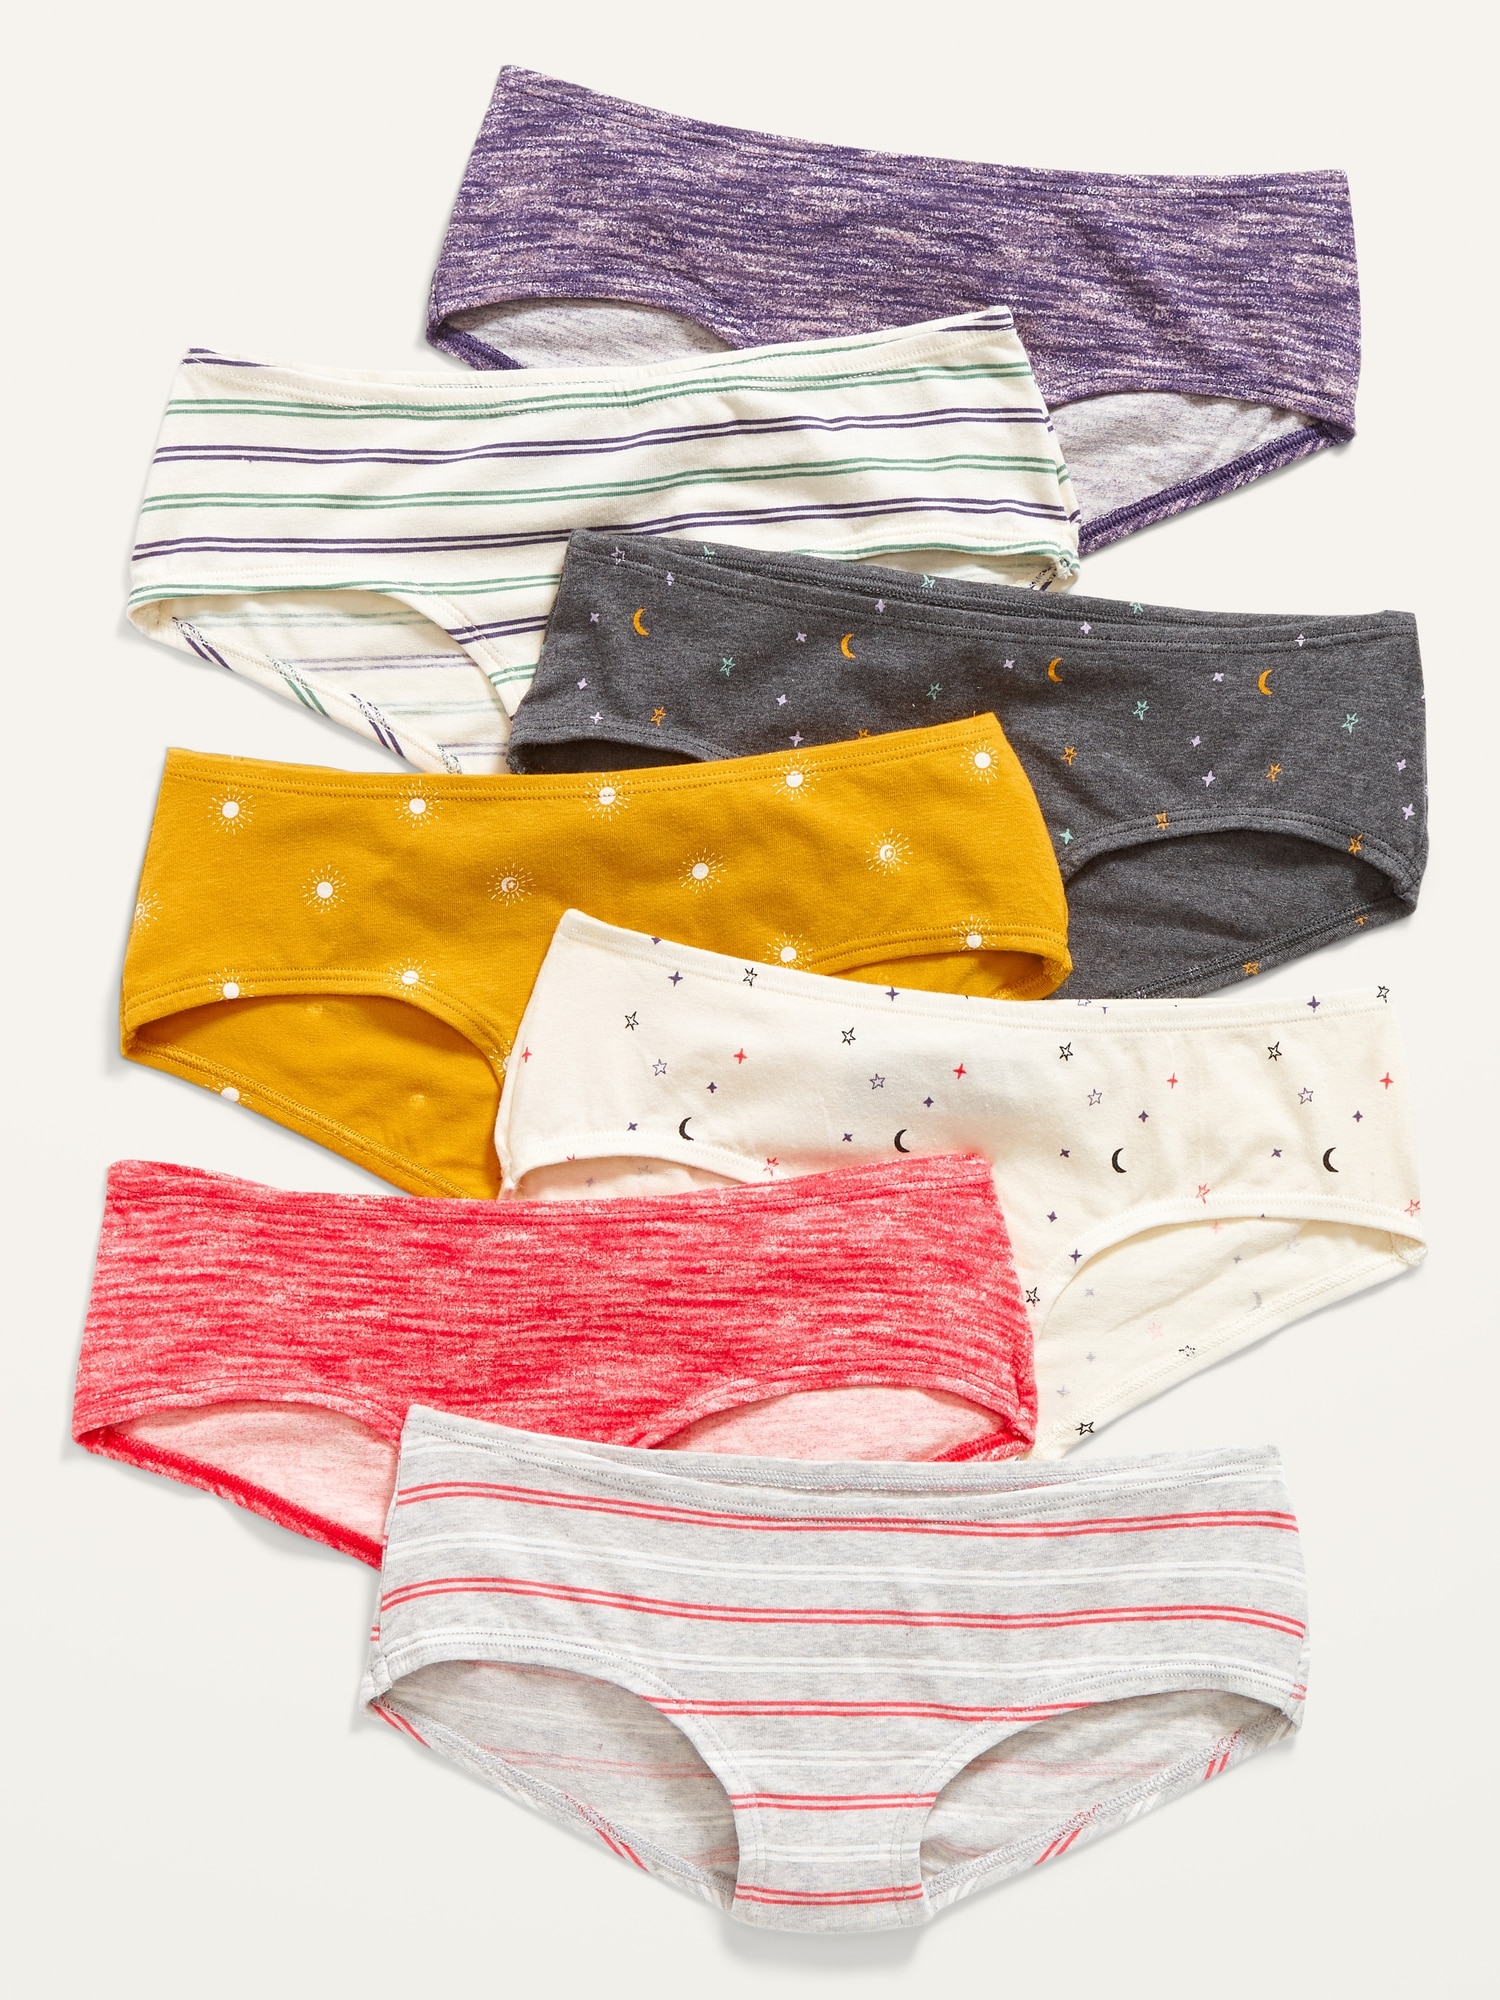 Rae Dunn Girl's 7-Pack Hipsters Underwear Panties Day Of The Week NEW w TAGS